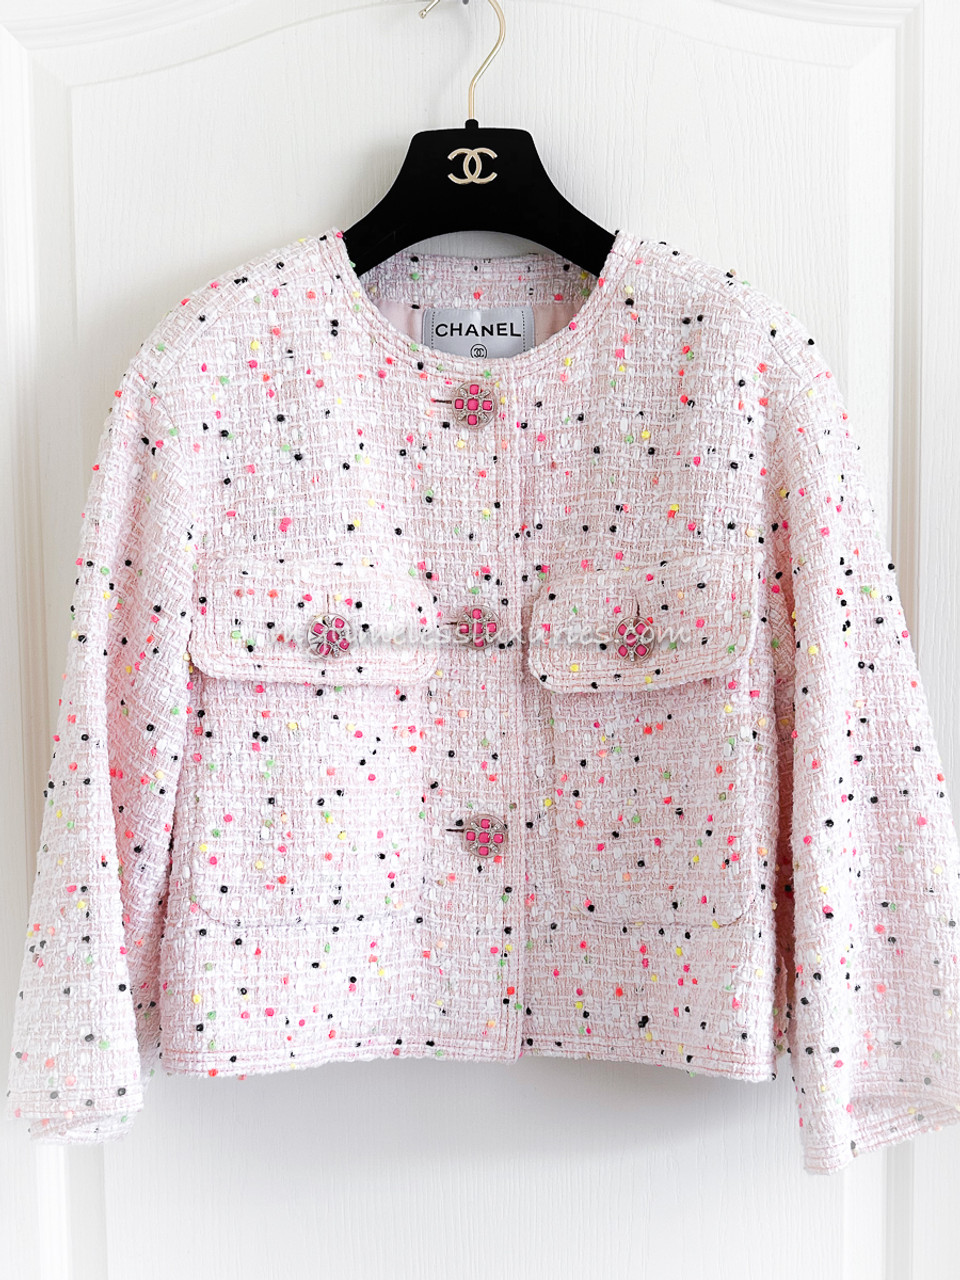 CHANEL 19S Pink Fantasy Tweed Jacket - Timeless Luxuries